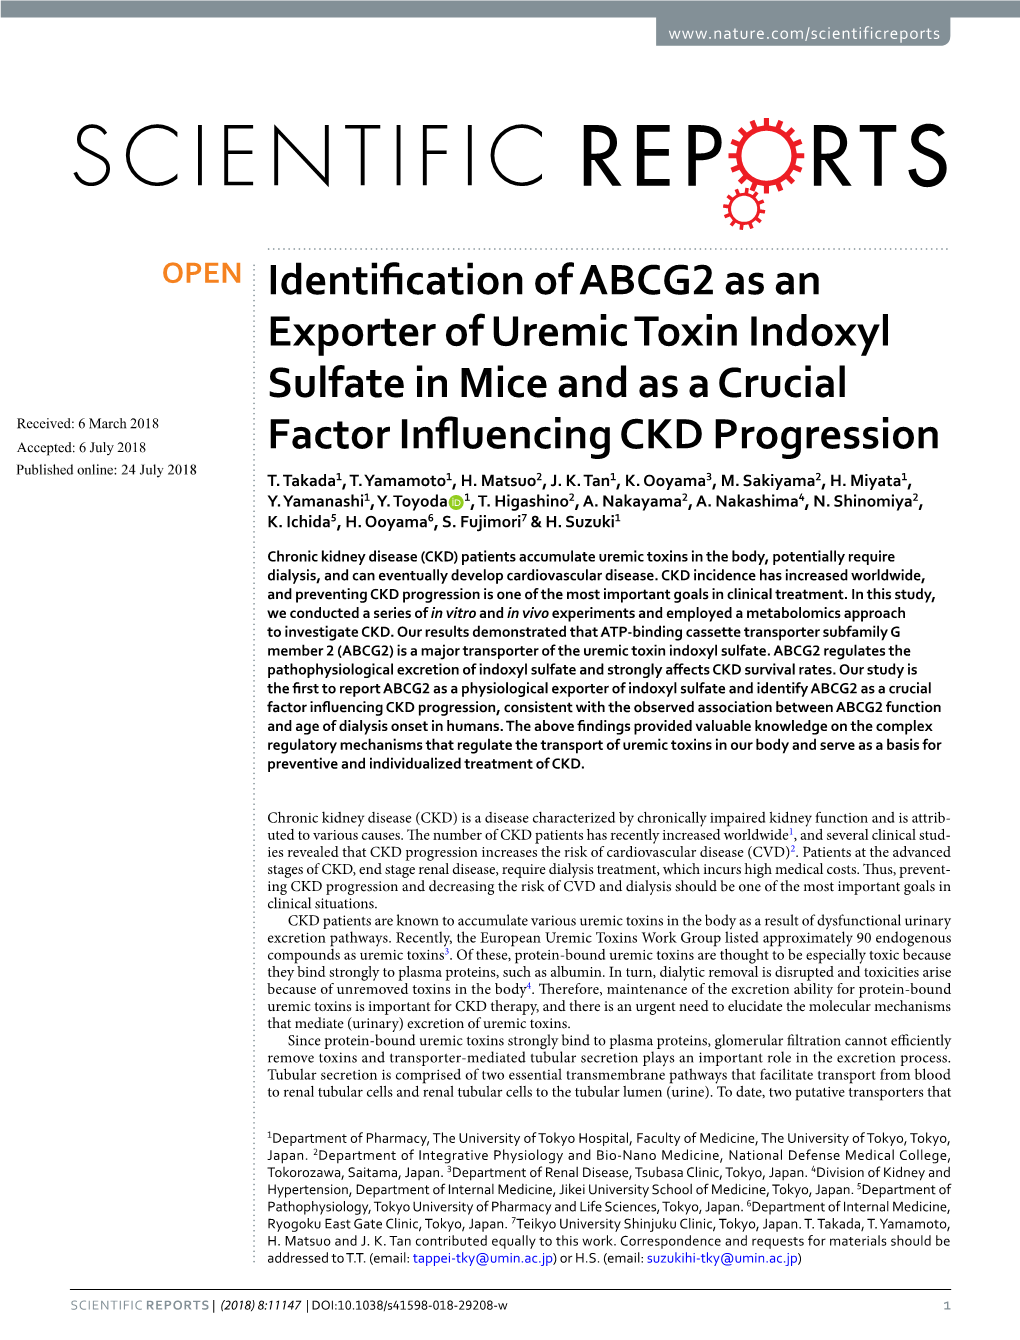 Identification of ABCG2 As an Exporter of Uremic Toxin Indoxyl Sulfate in Mice and As a Crucial Factor Influencing CKD Progressi